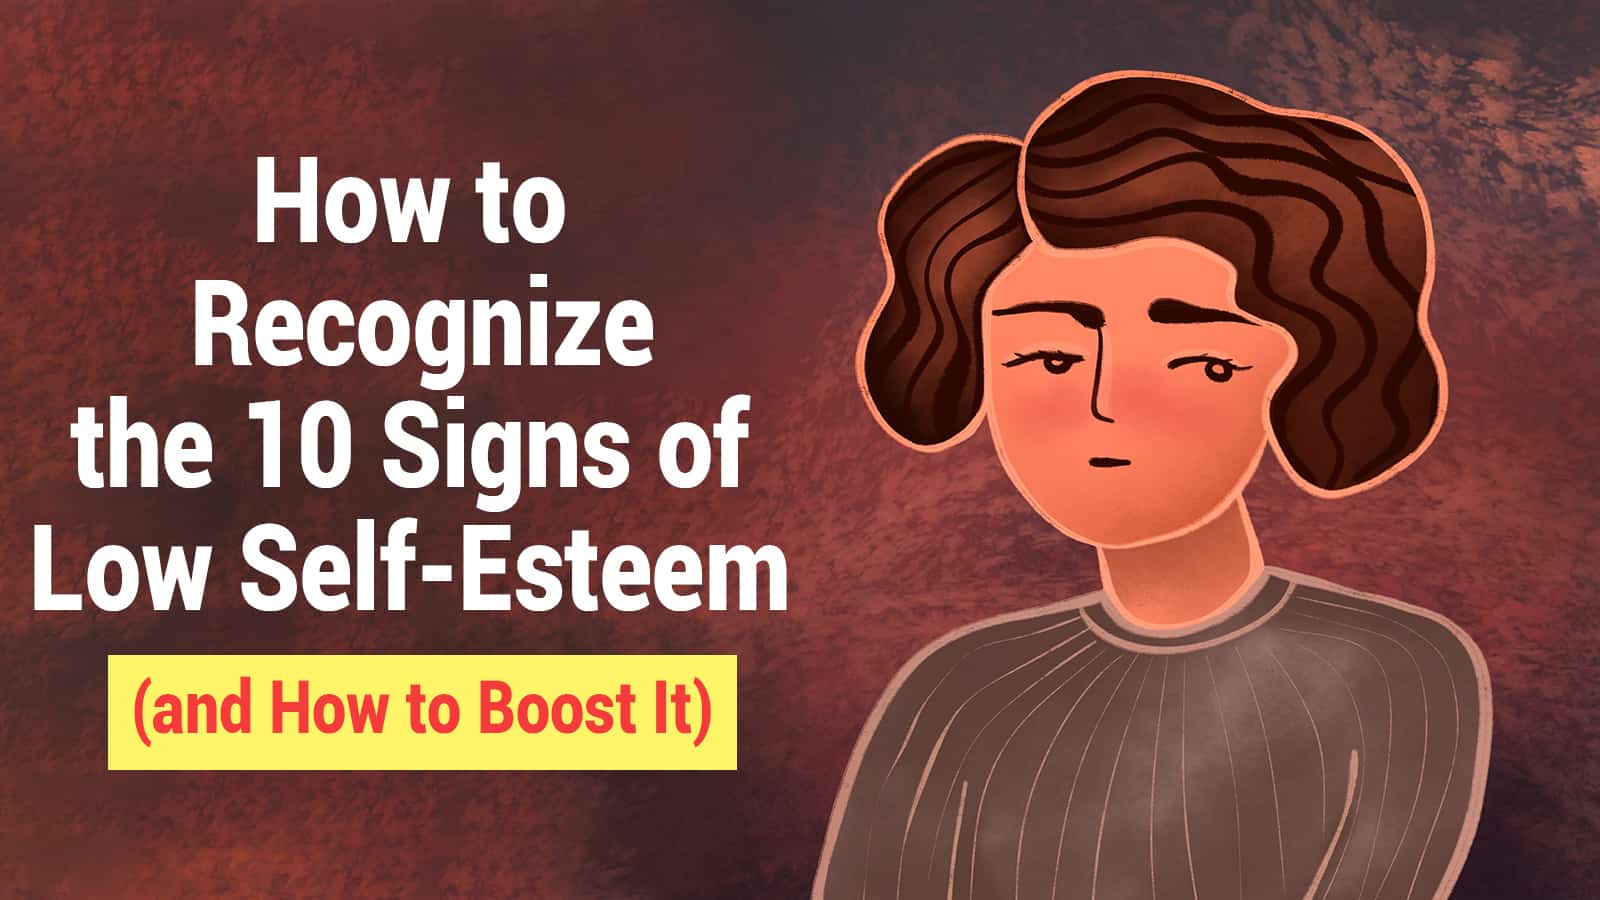 How to Recognize the 10 Signs of Low Self-Esteem (and How to Boost It)